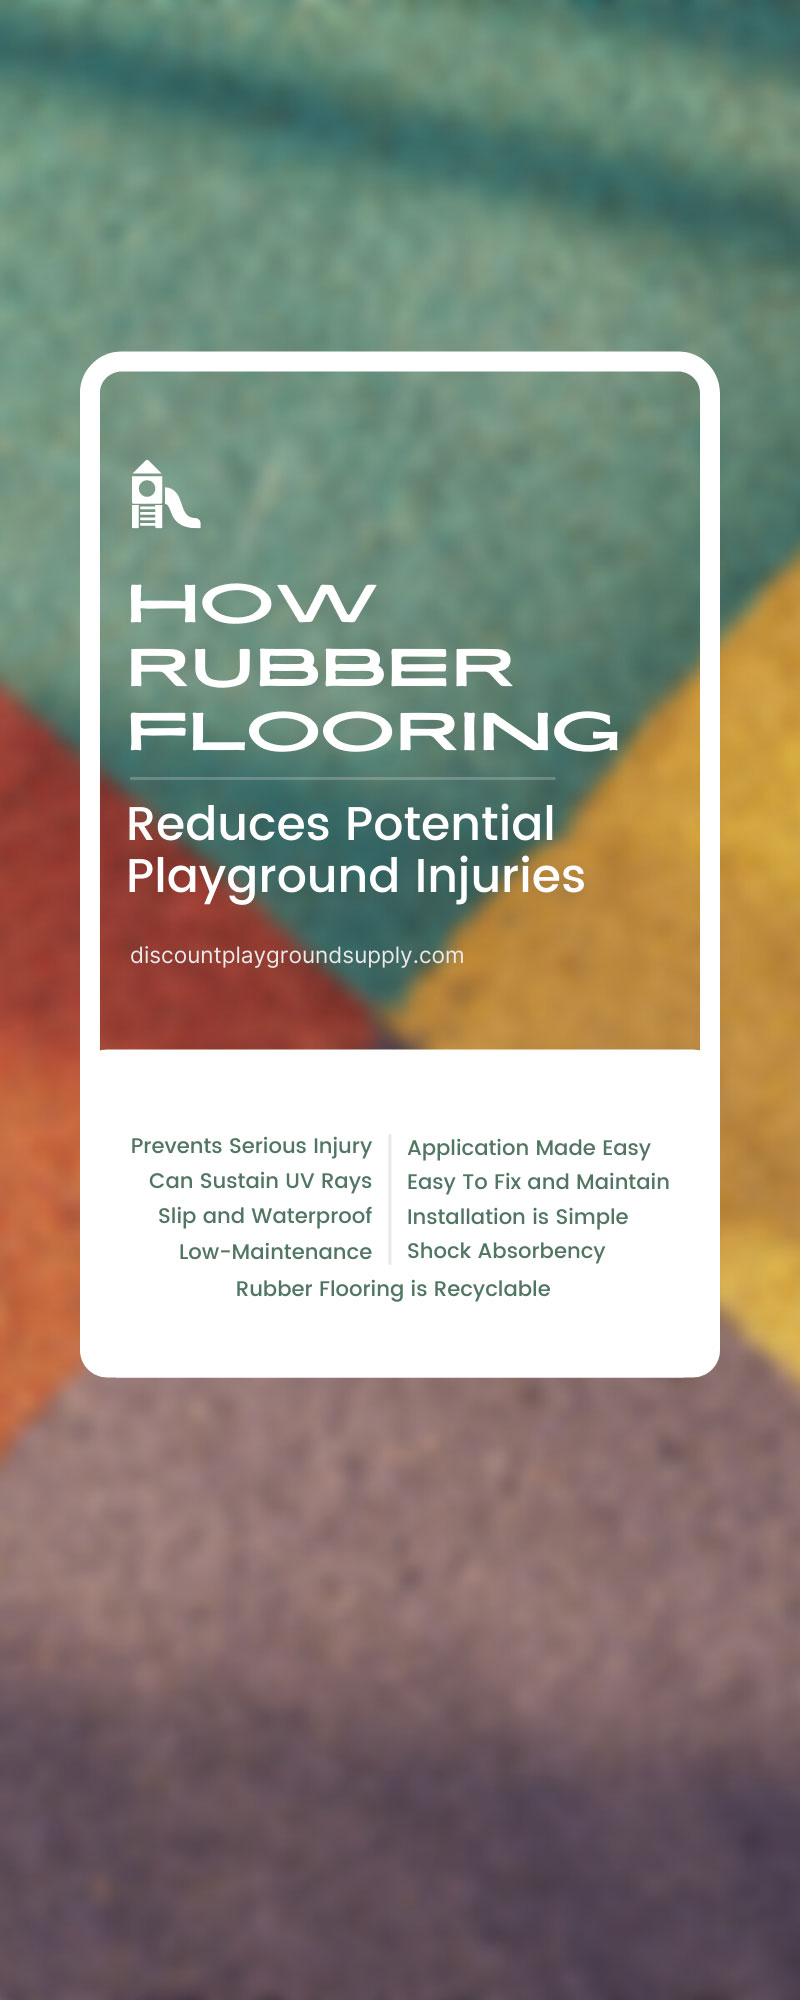 How Rubber Flooring Reduces Potential Playground Injuries